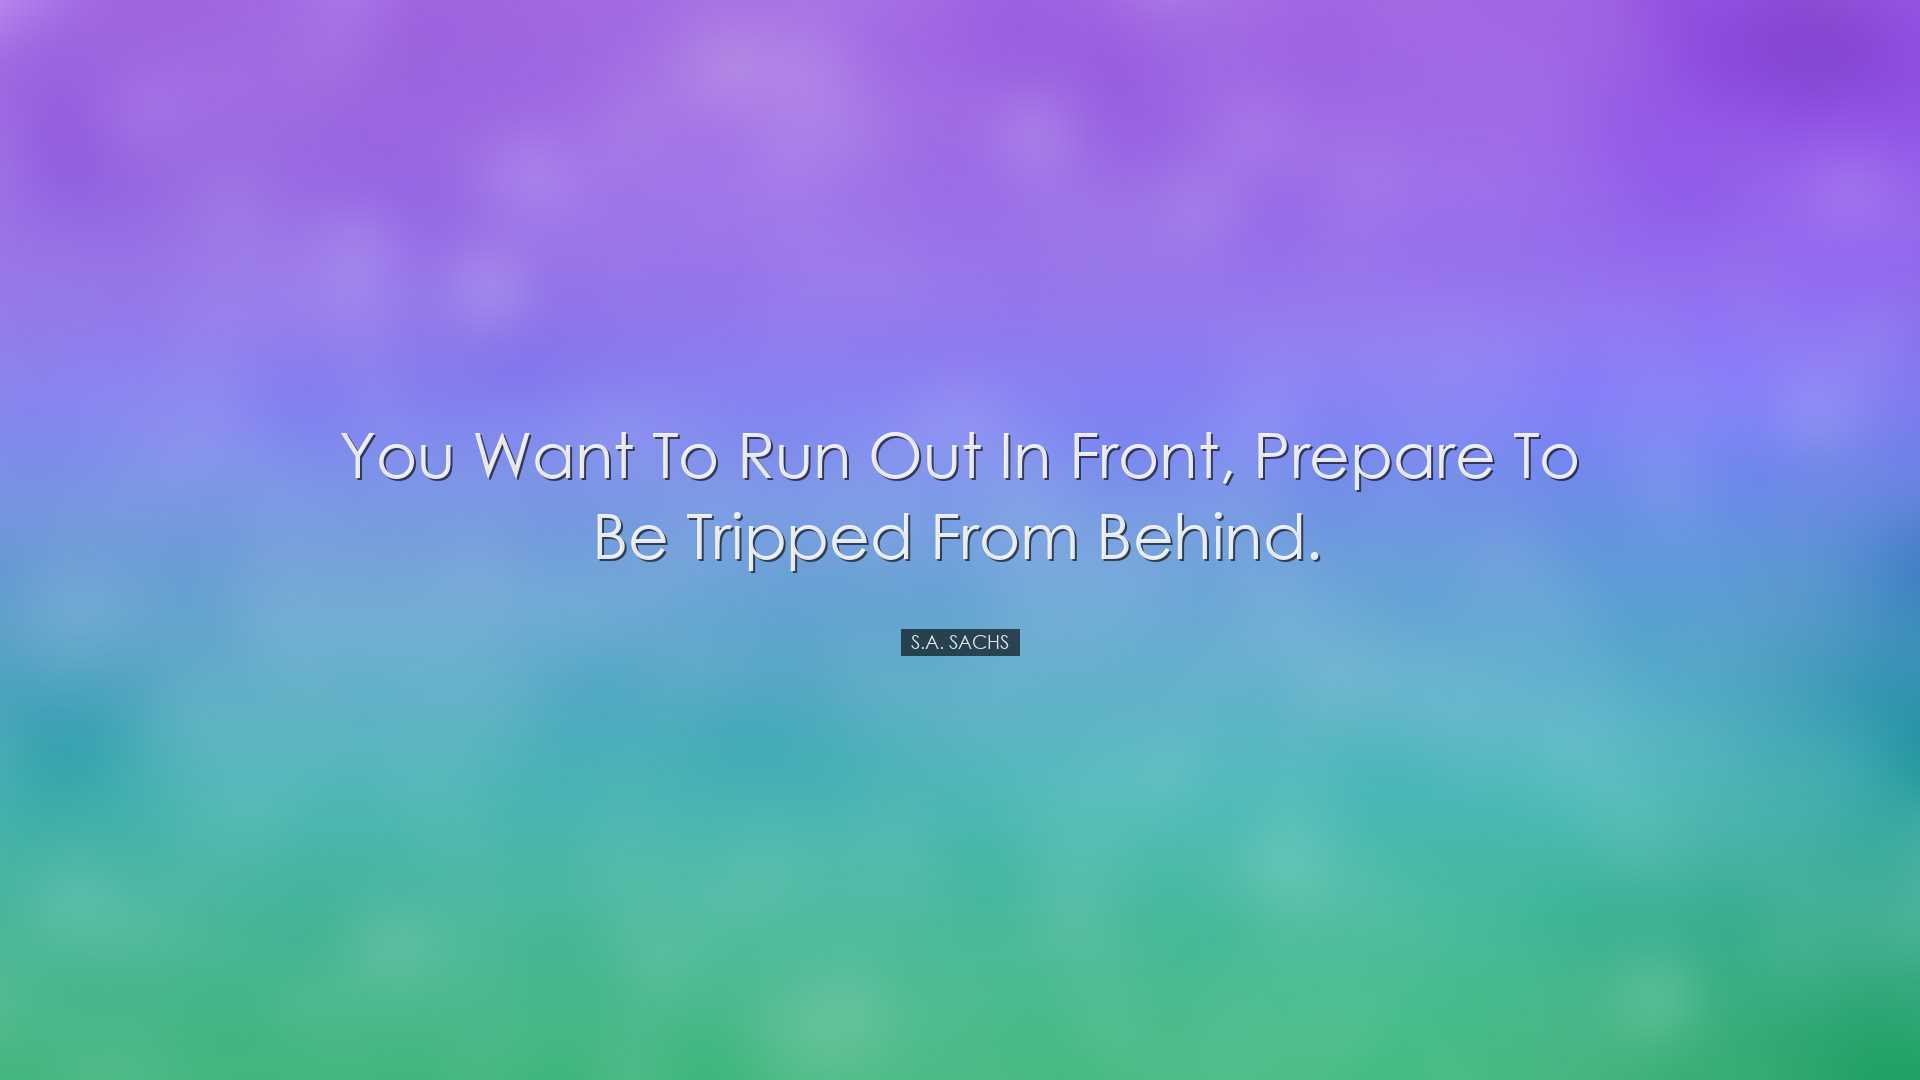 You want to run out in front, prepare to be tripped from behind. -